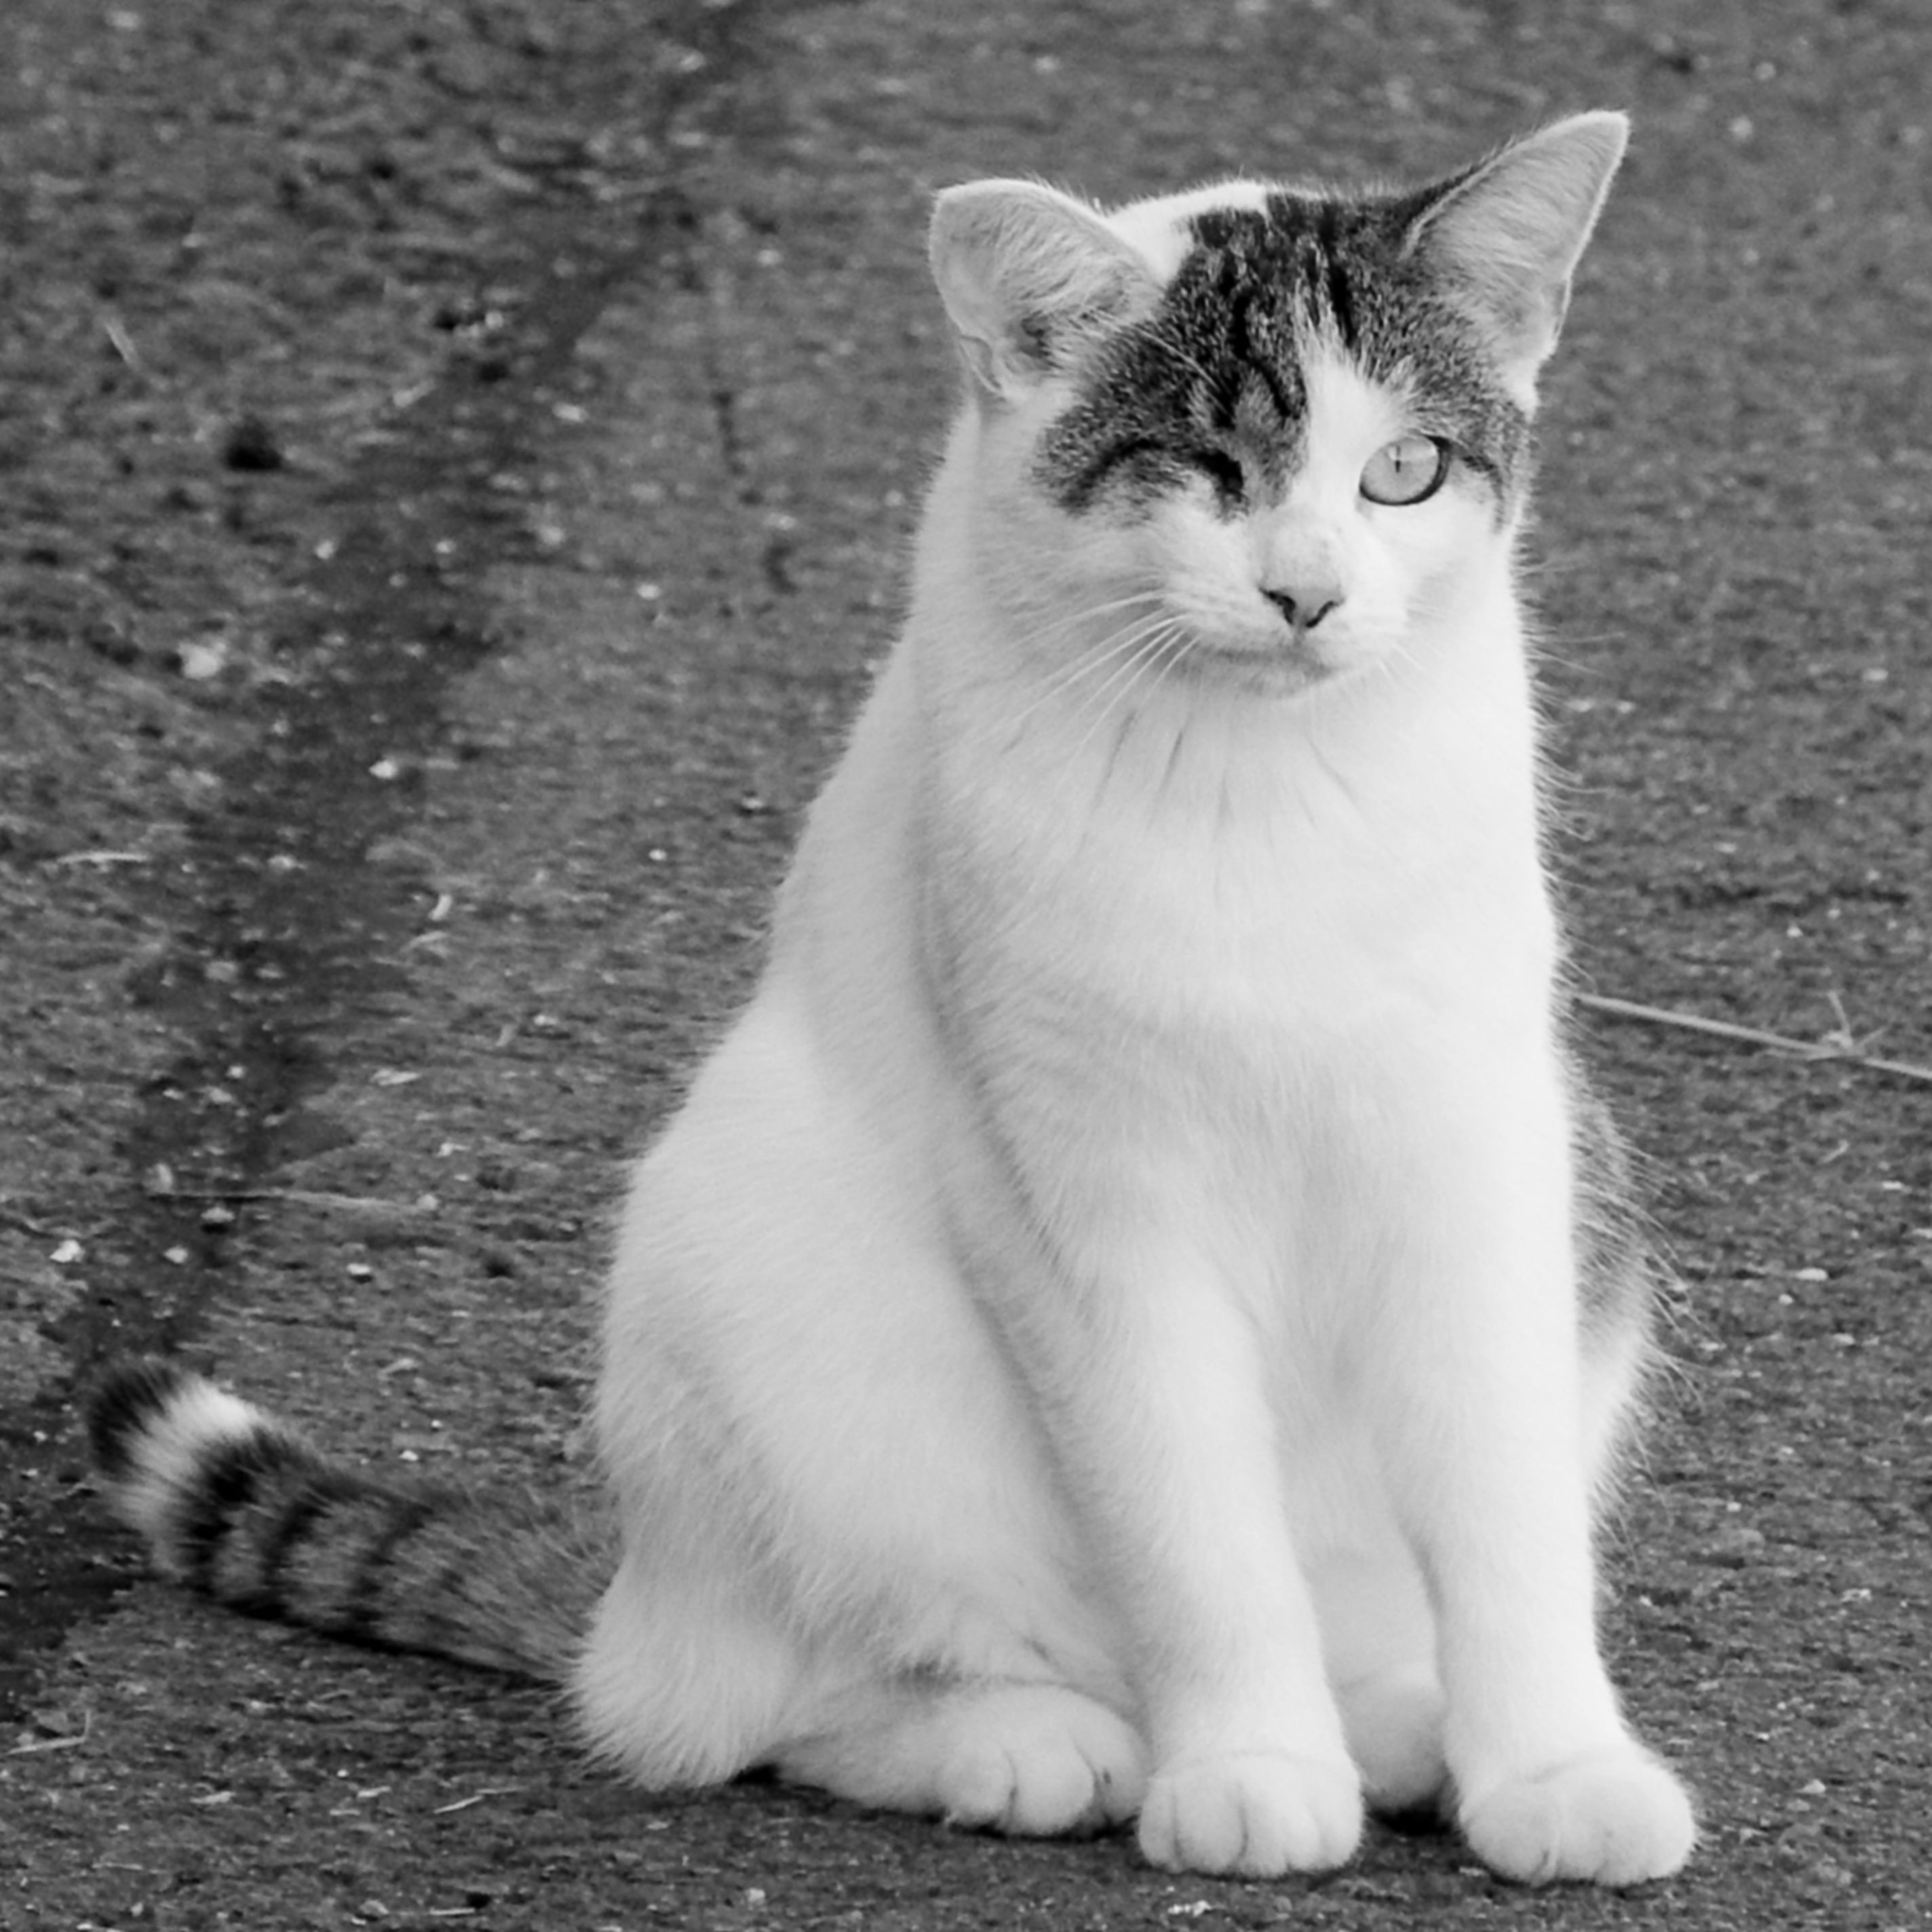 white and gray tabby cat